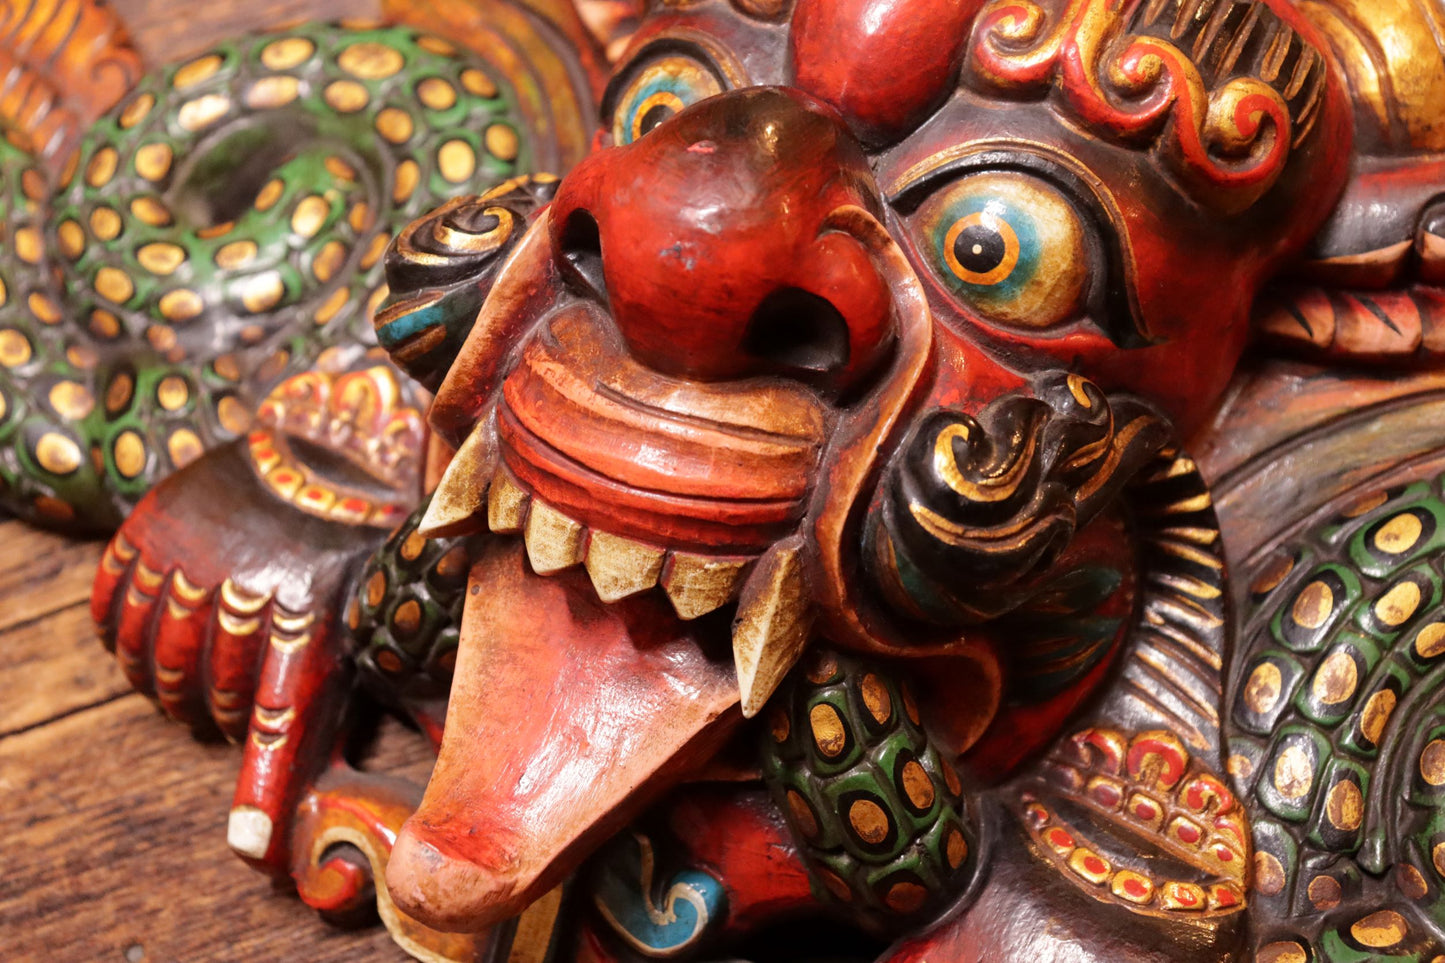 Carved Wooden Cheppu Mask